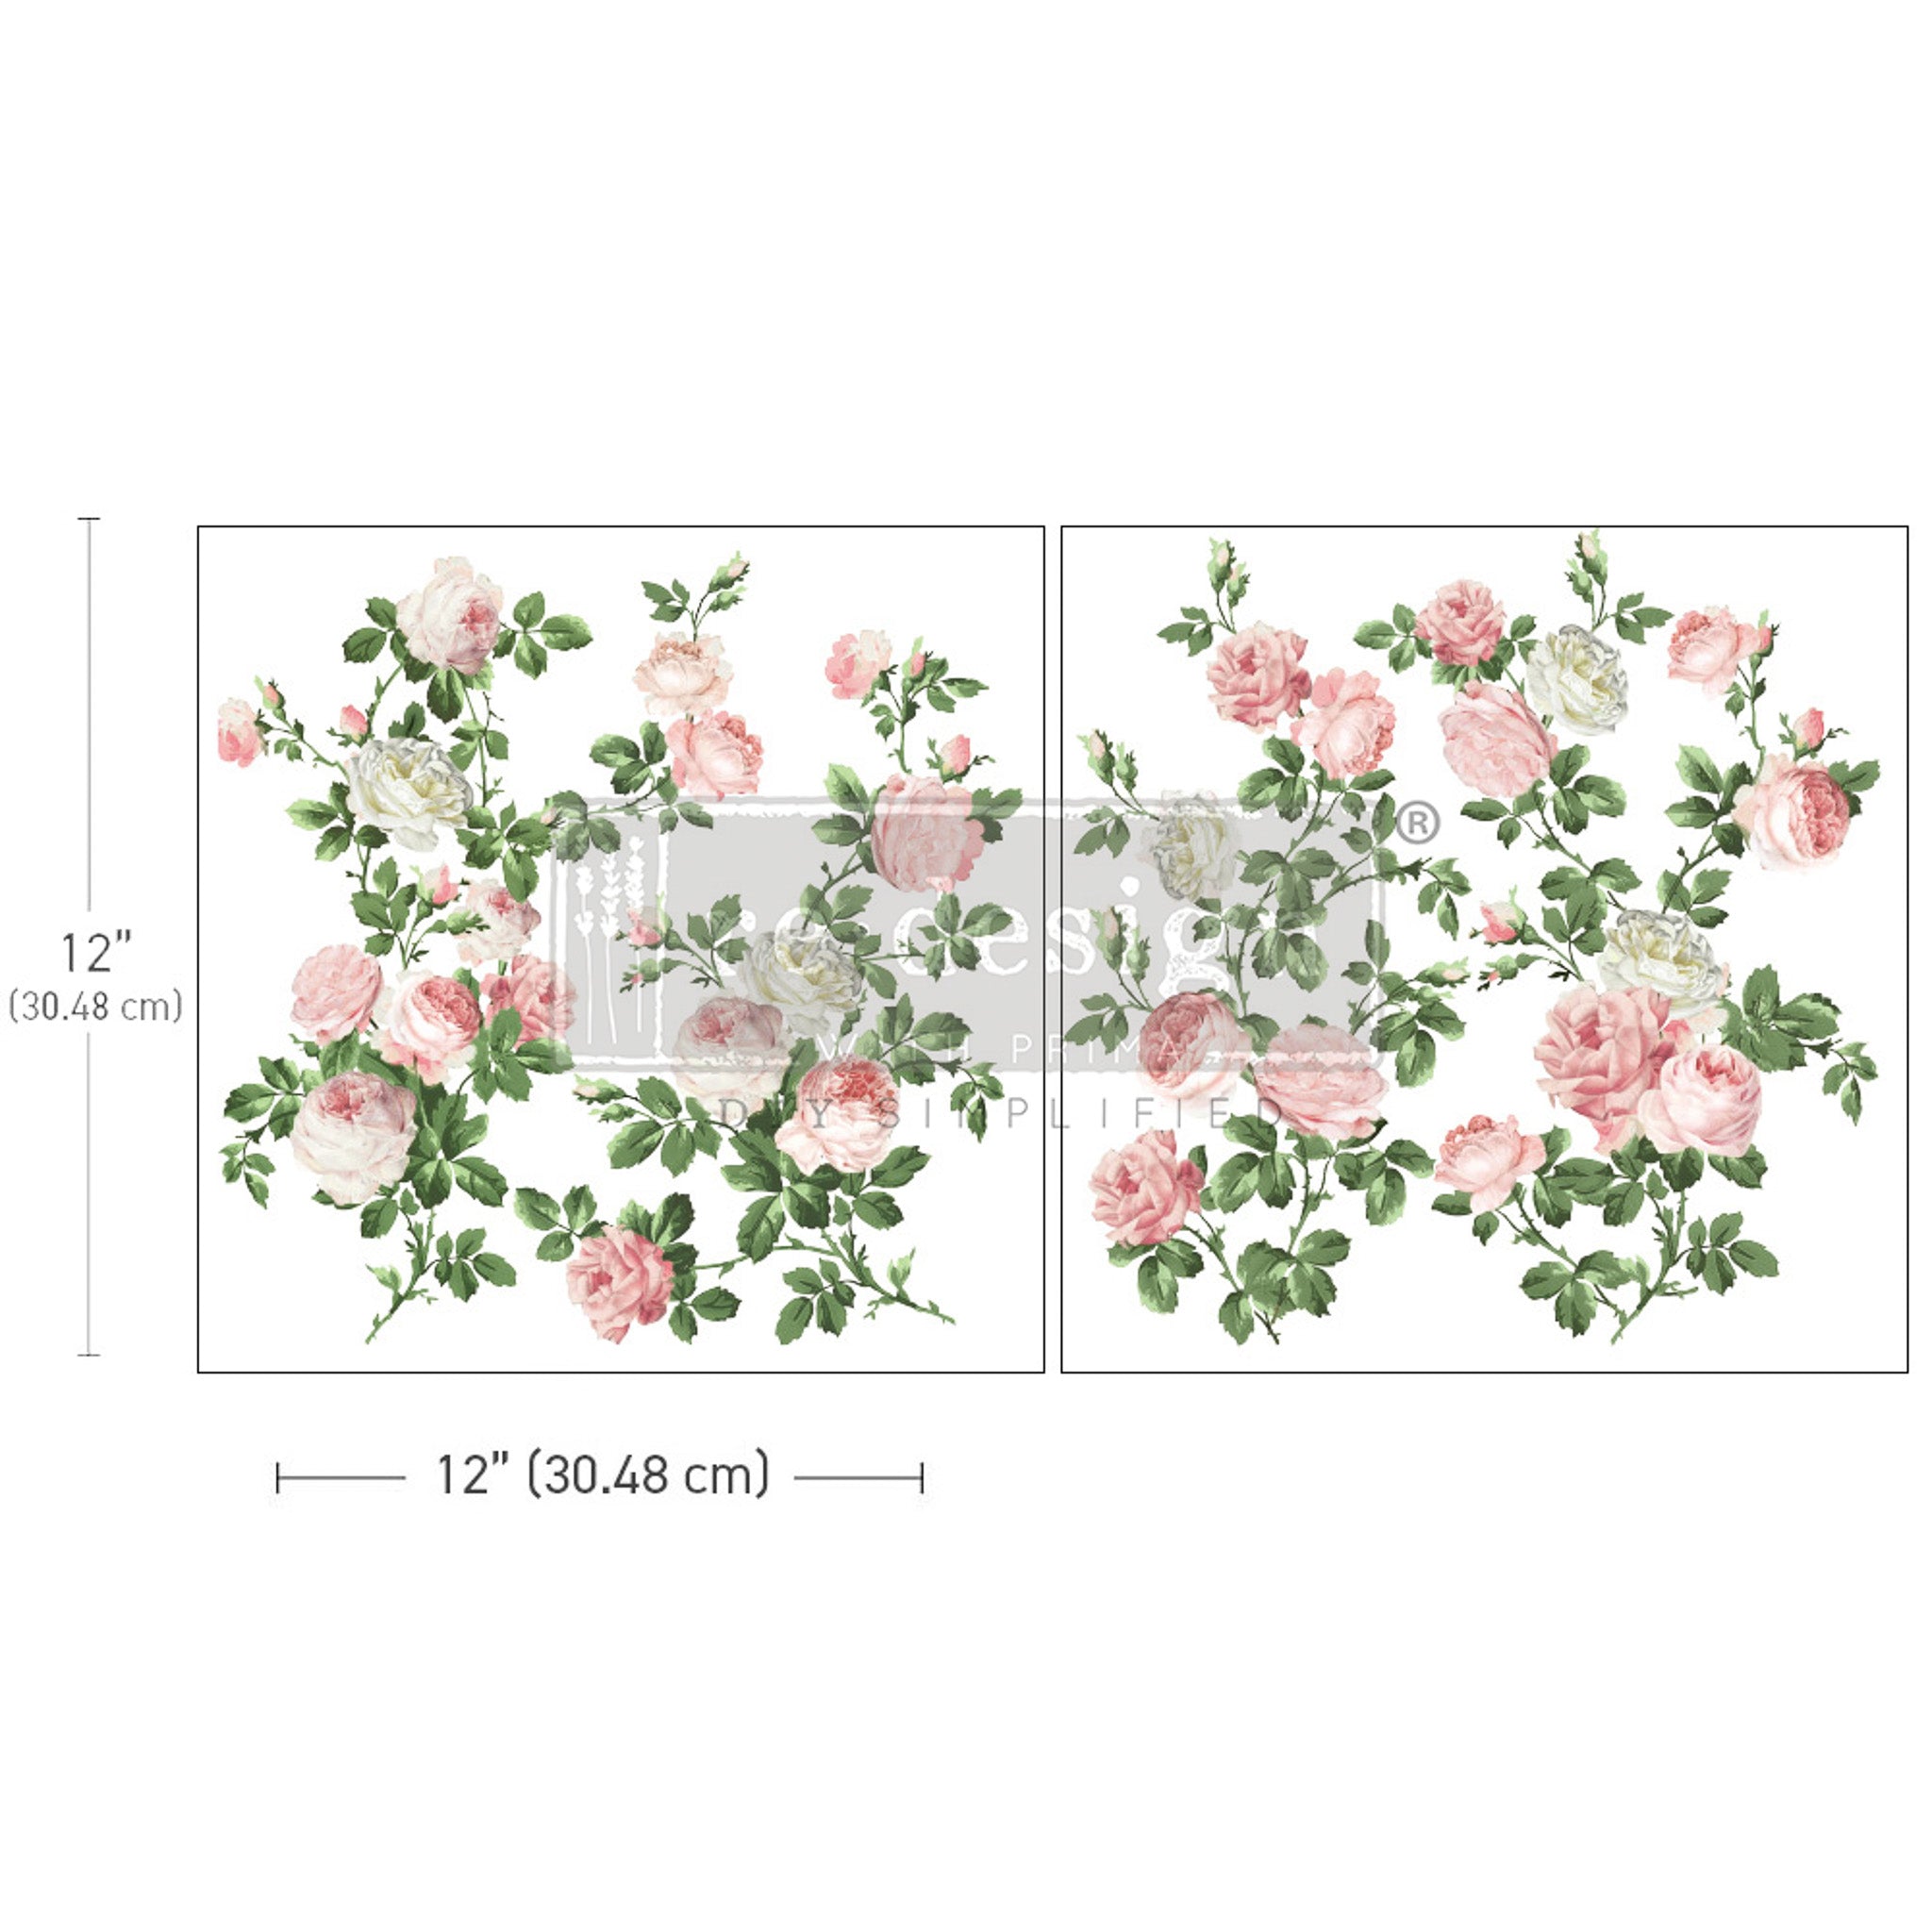 Two sheets of rub-on transfers featuring pretty pink and white roses with their green foliage. Measurements for 1 sheet reads 12" (30.48 cm) by 12" (30.48 cm).